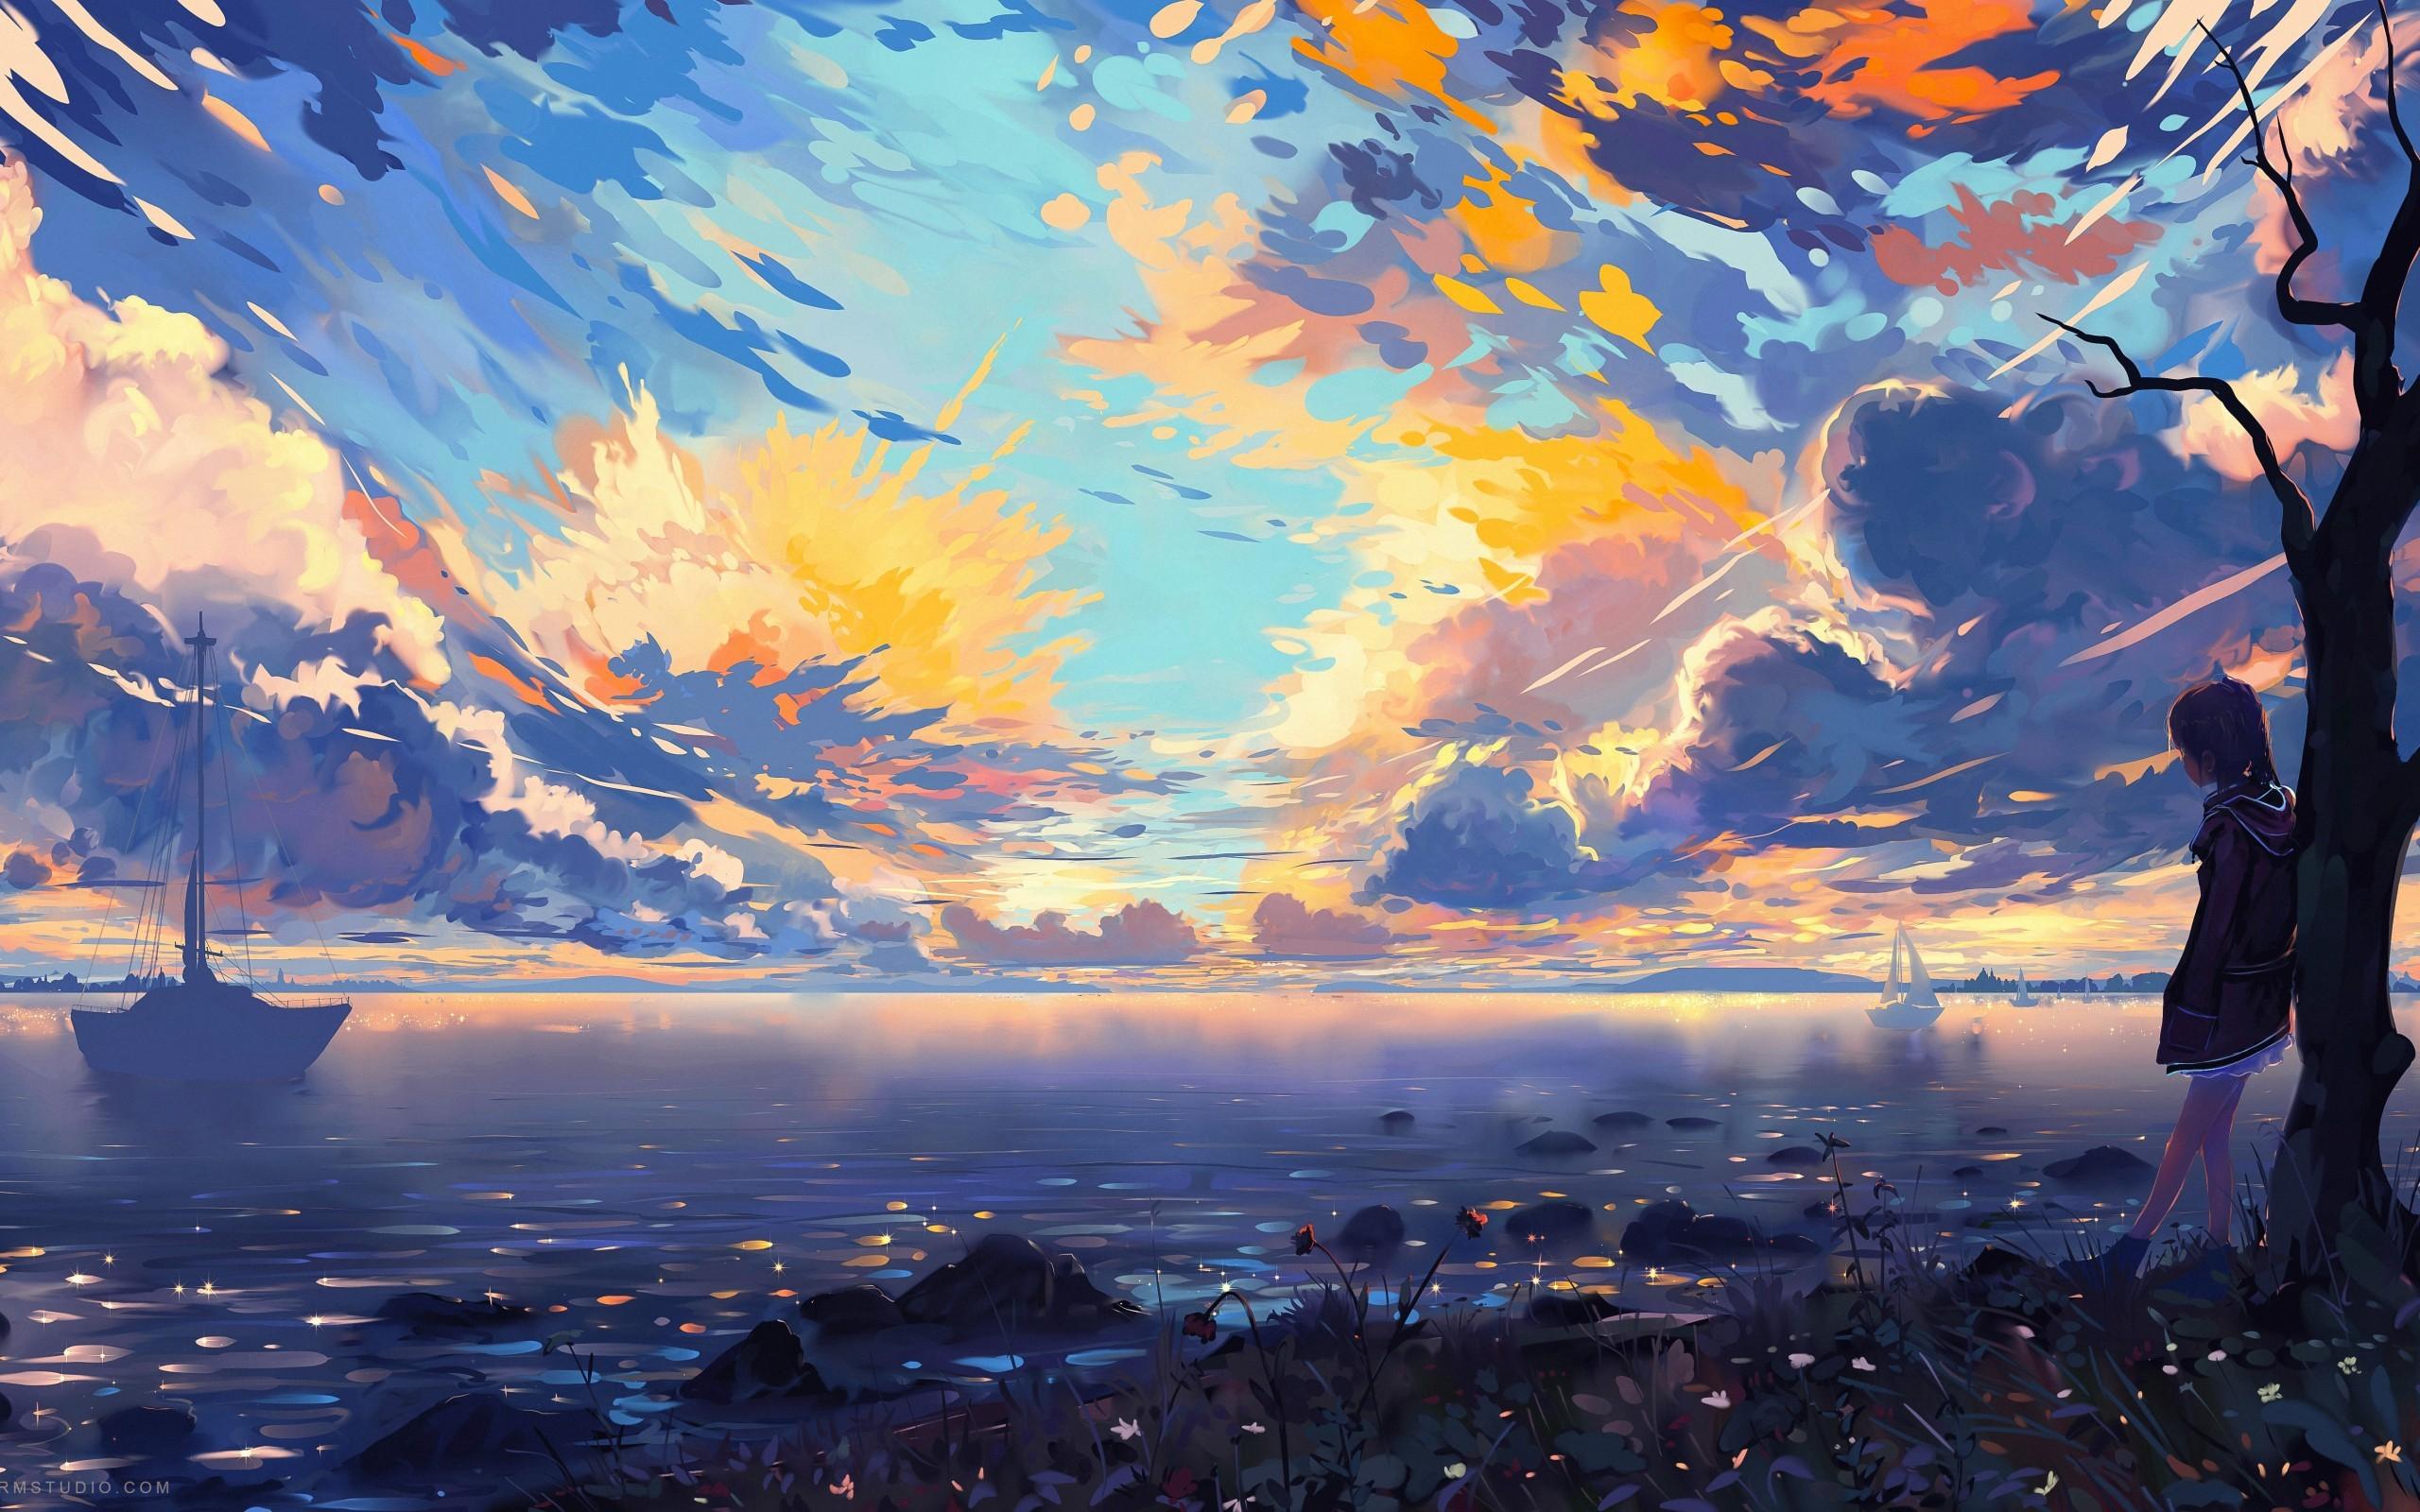 Download 2560x1600 Anime Landscape, Sea, Ships, Colorful, Clouds